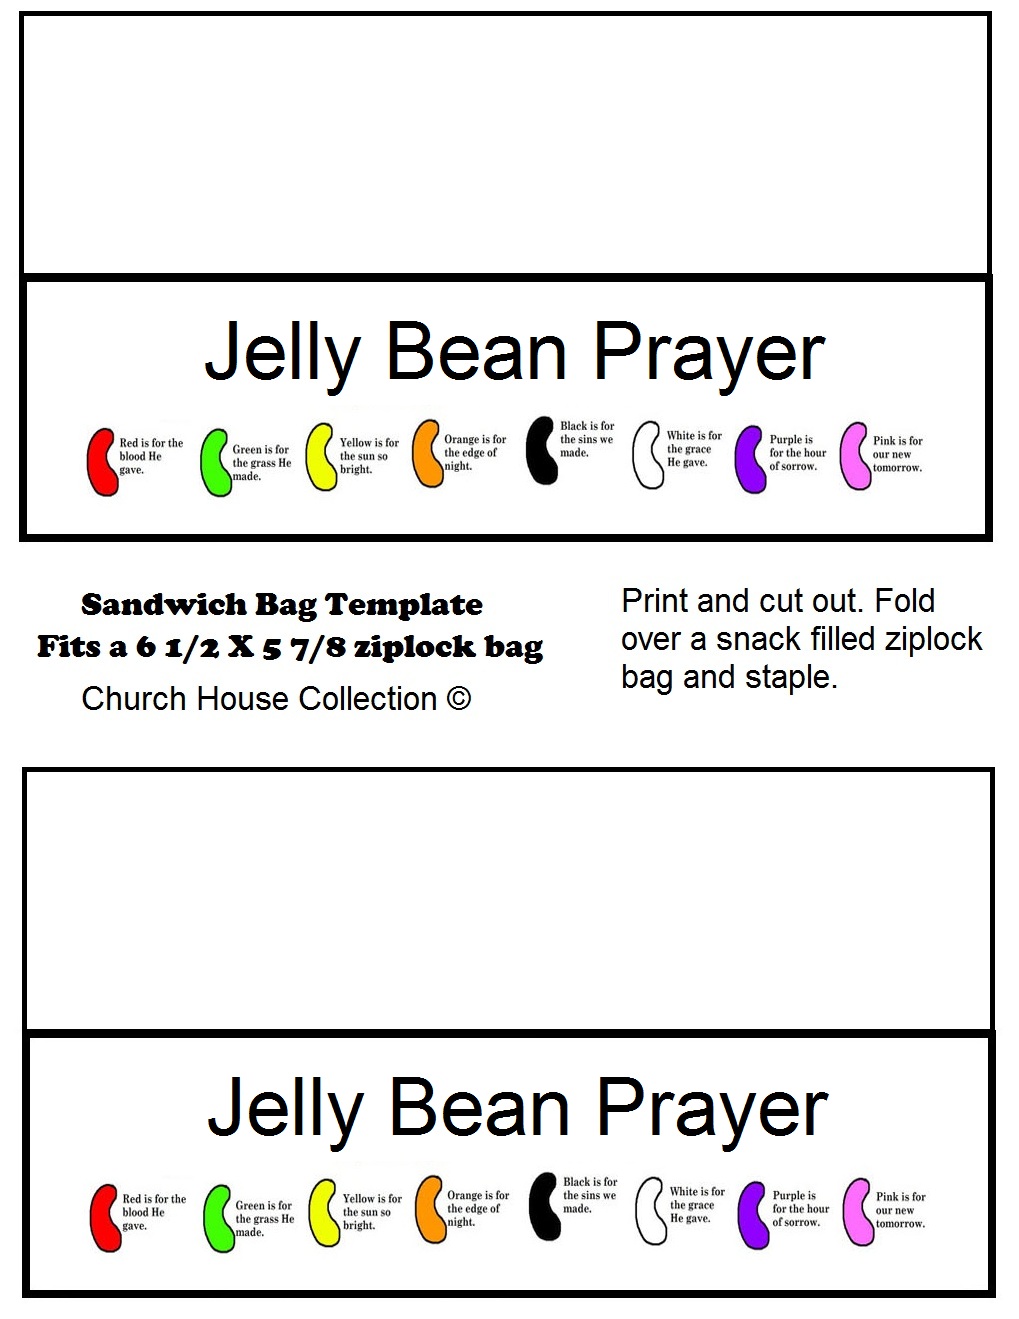 Download Jelly Bean Prayer Sunday School Lesson For Kids | Coloring Pages, Crafts, Snacks, Worksheets